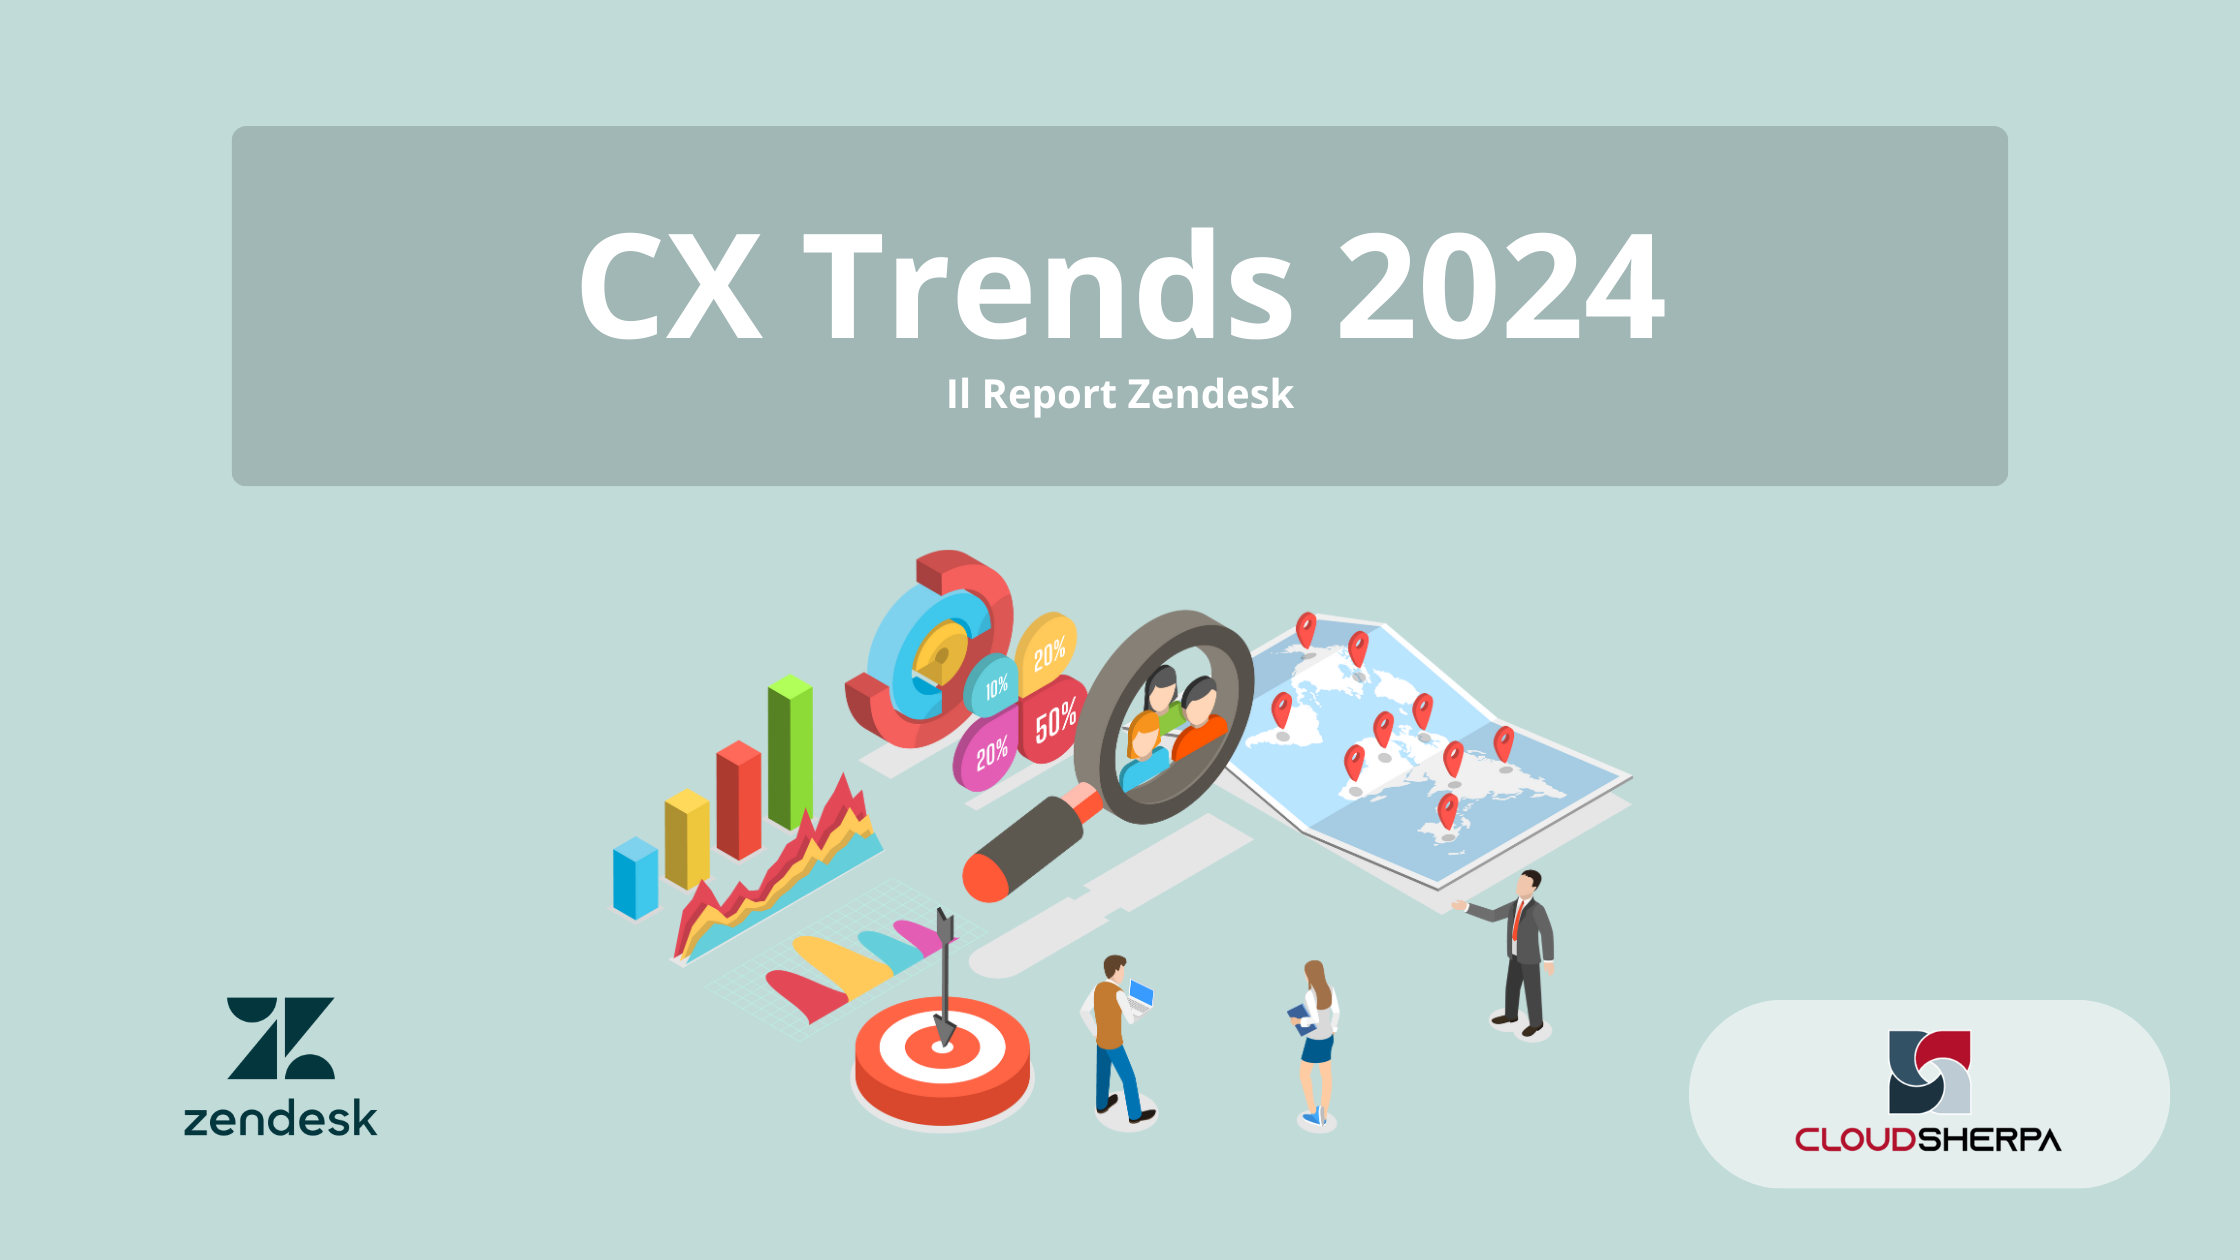 Customer Experience trends